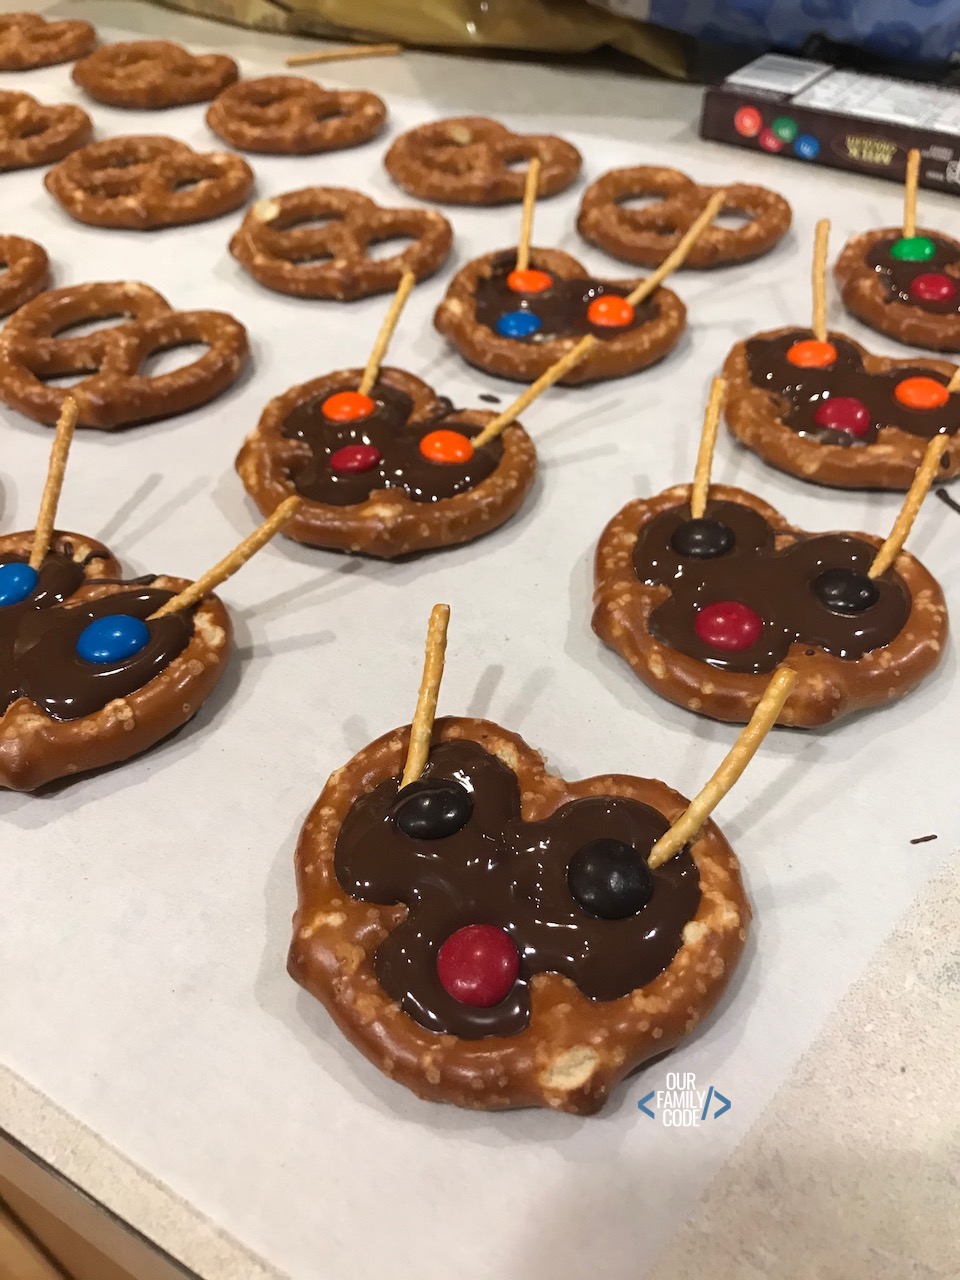 A picture of chocolate reindeer pretzels on wax paper.